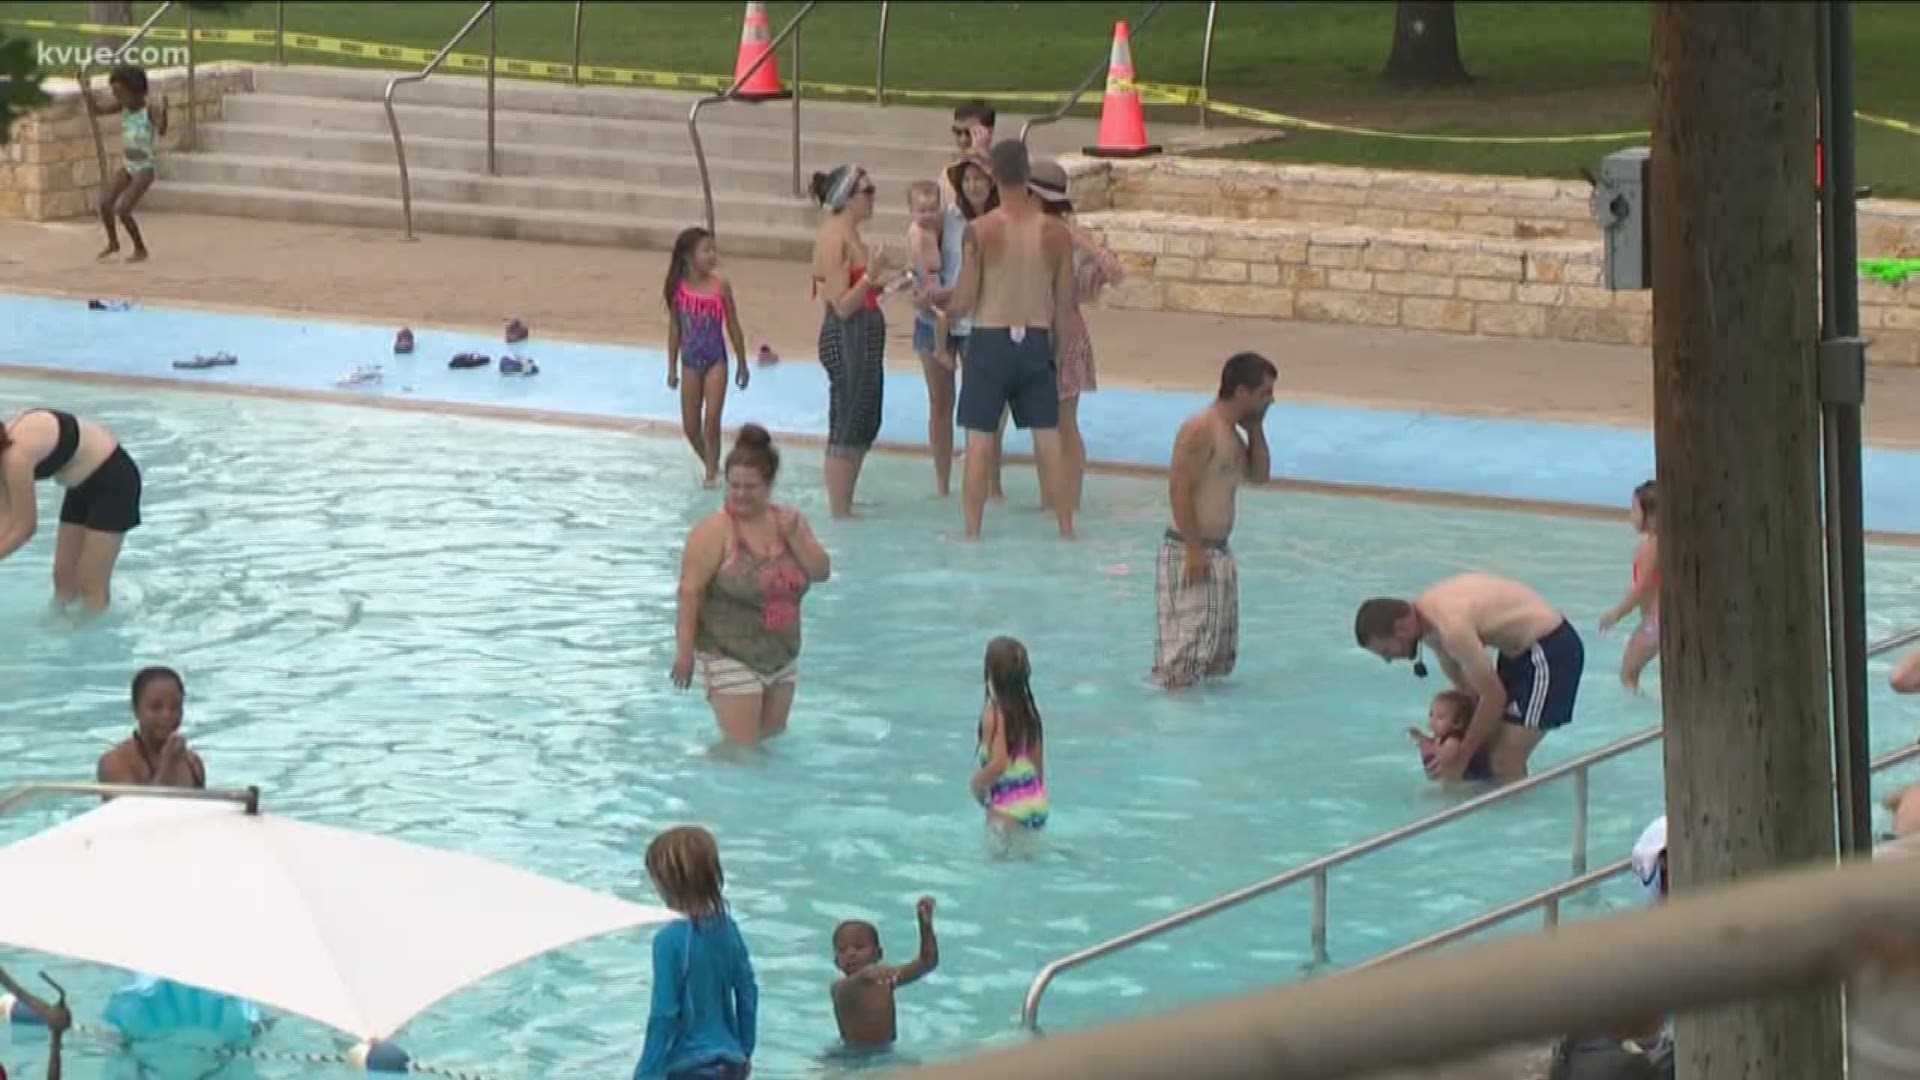 The parks and recreation department will begin a series of hiring events for the pools this summer.